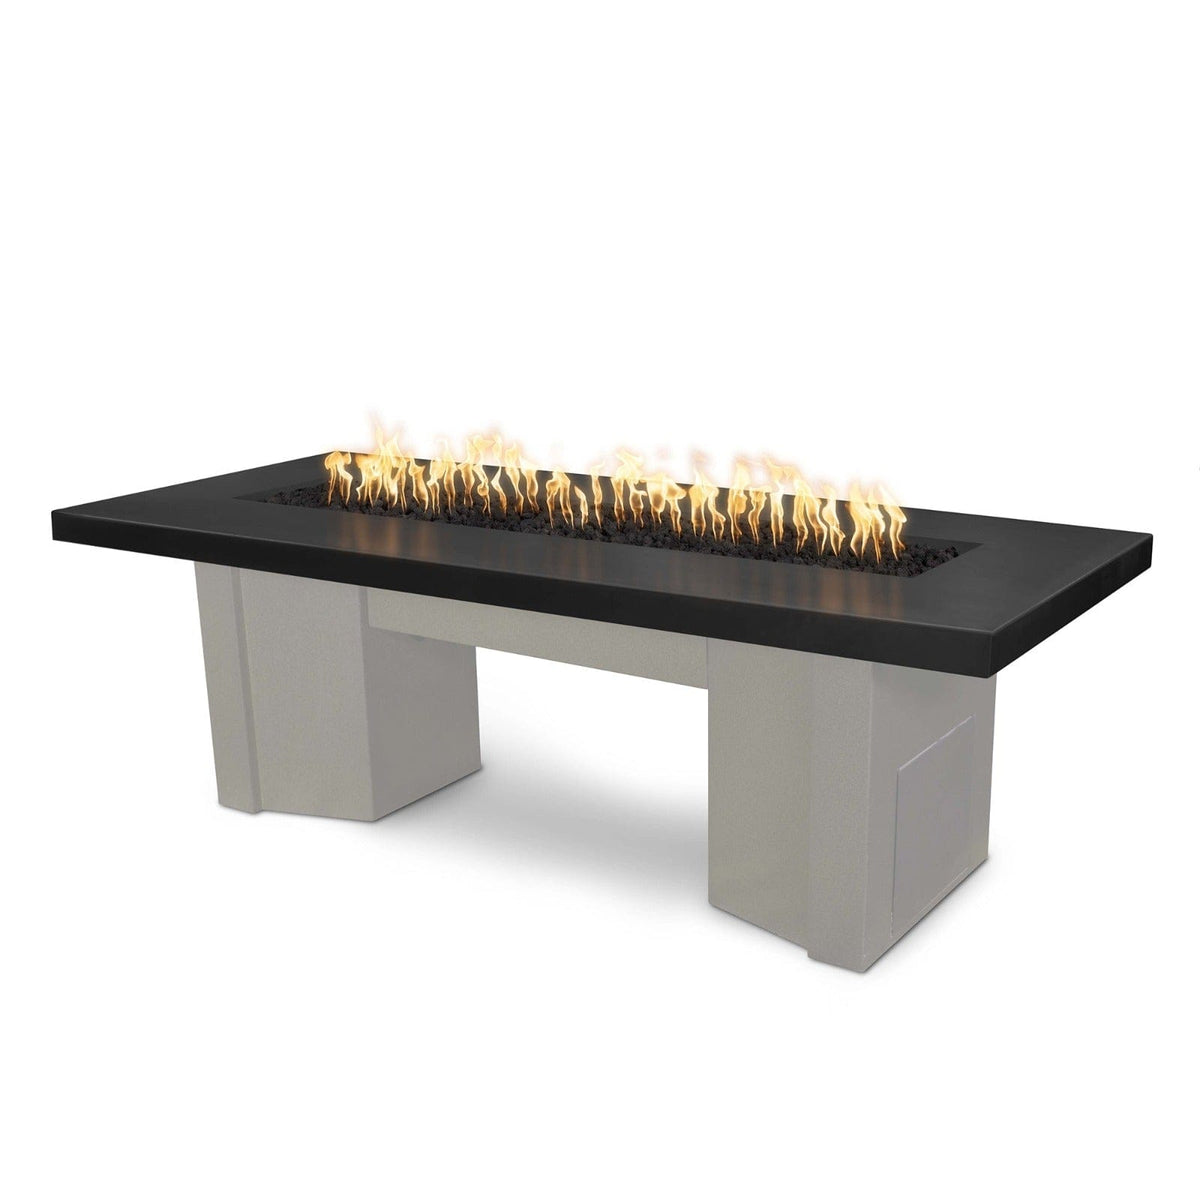 The Outdoor Plus Fire Features Black (-BLK) / Pewter Powder Coated Steel (-PEW) The Outdoor Plus 60&quot; Alameda Fire Table Smooth Concrete in Liquid Propane - Flame Sense System with Push Button Spark Igniter / OPT-ALMGFRC60FSEN-LP